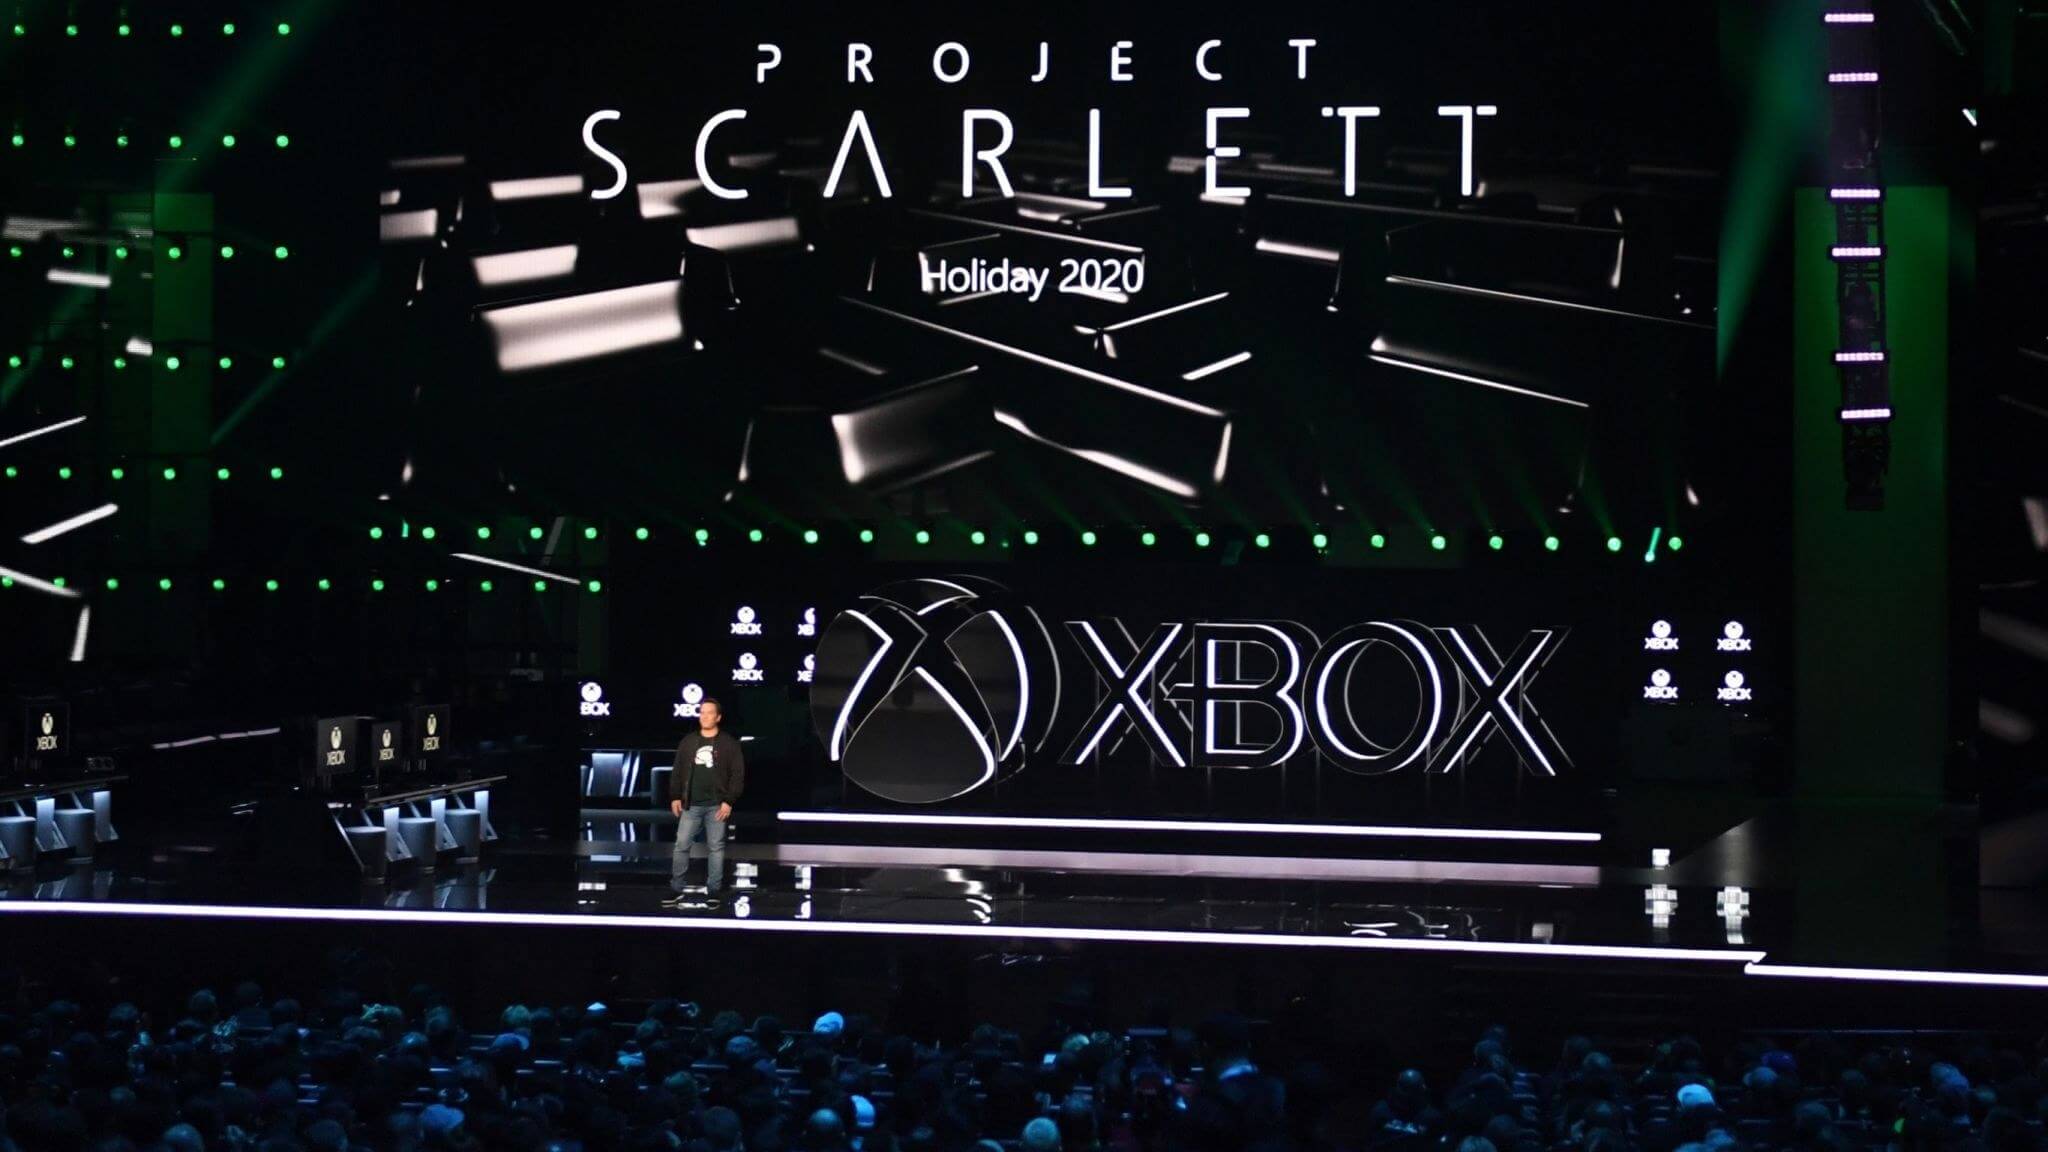 Microsoft only has one next-generation Xbox on the table, not two